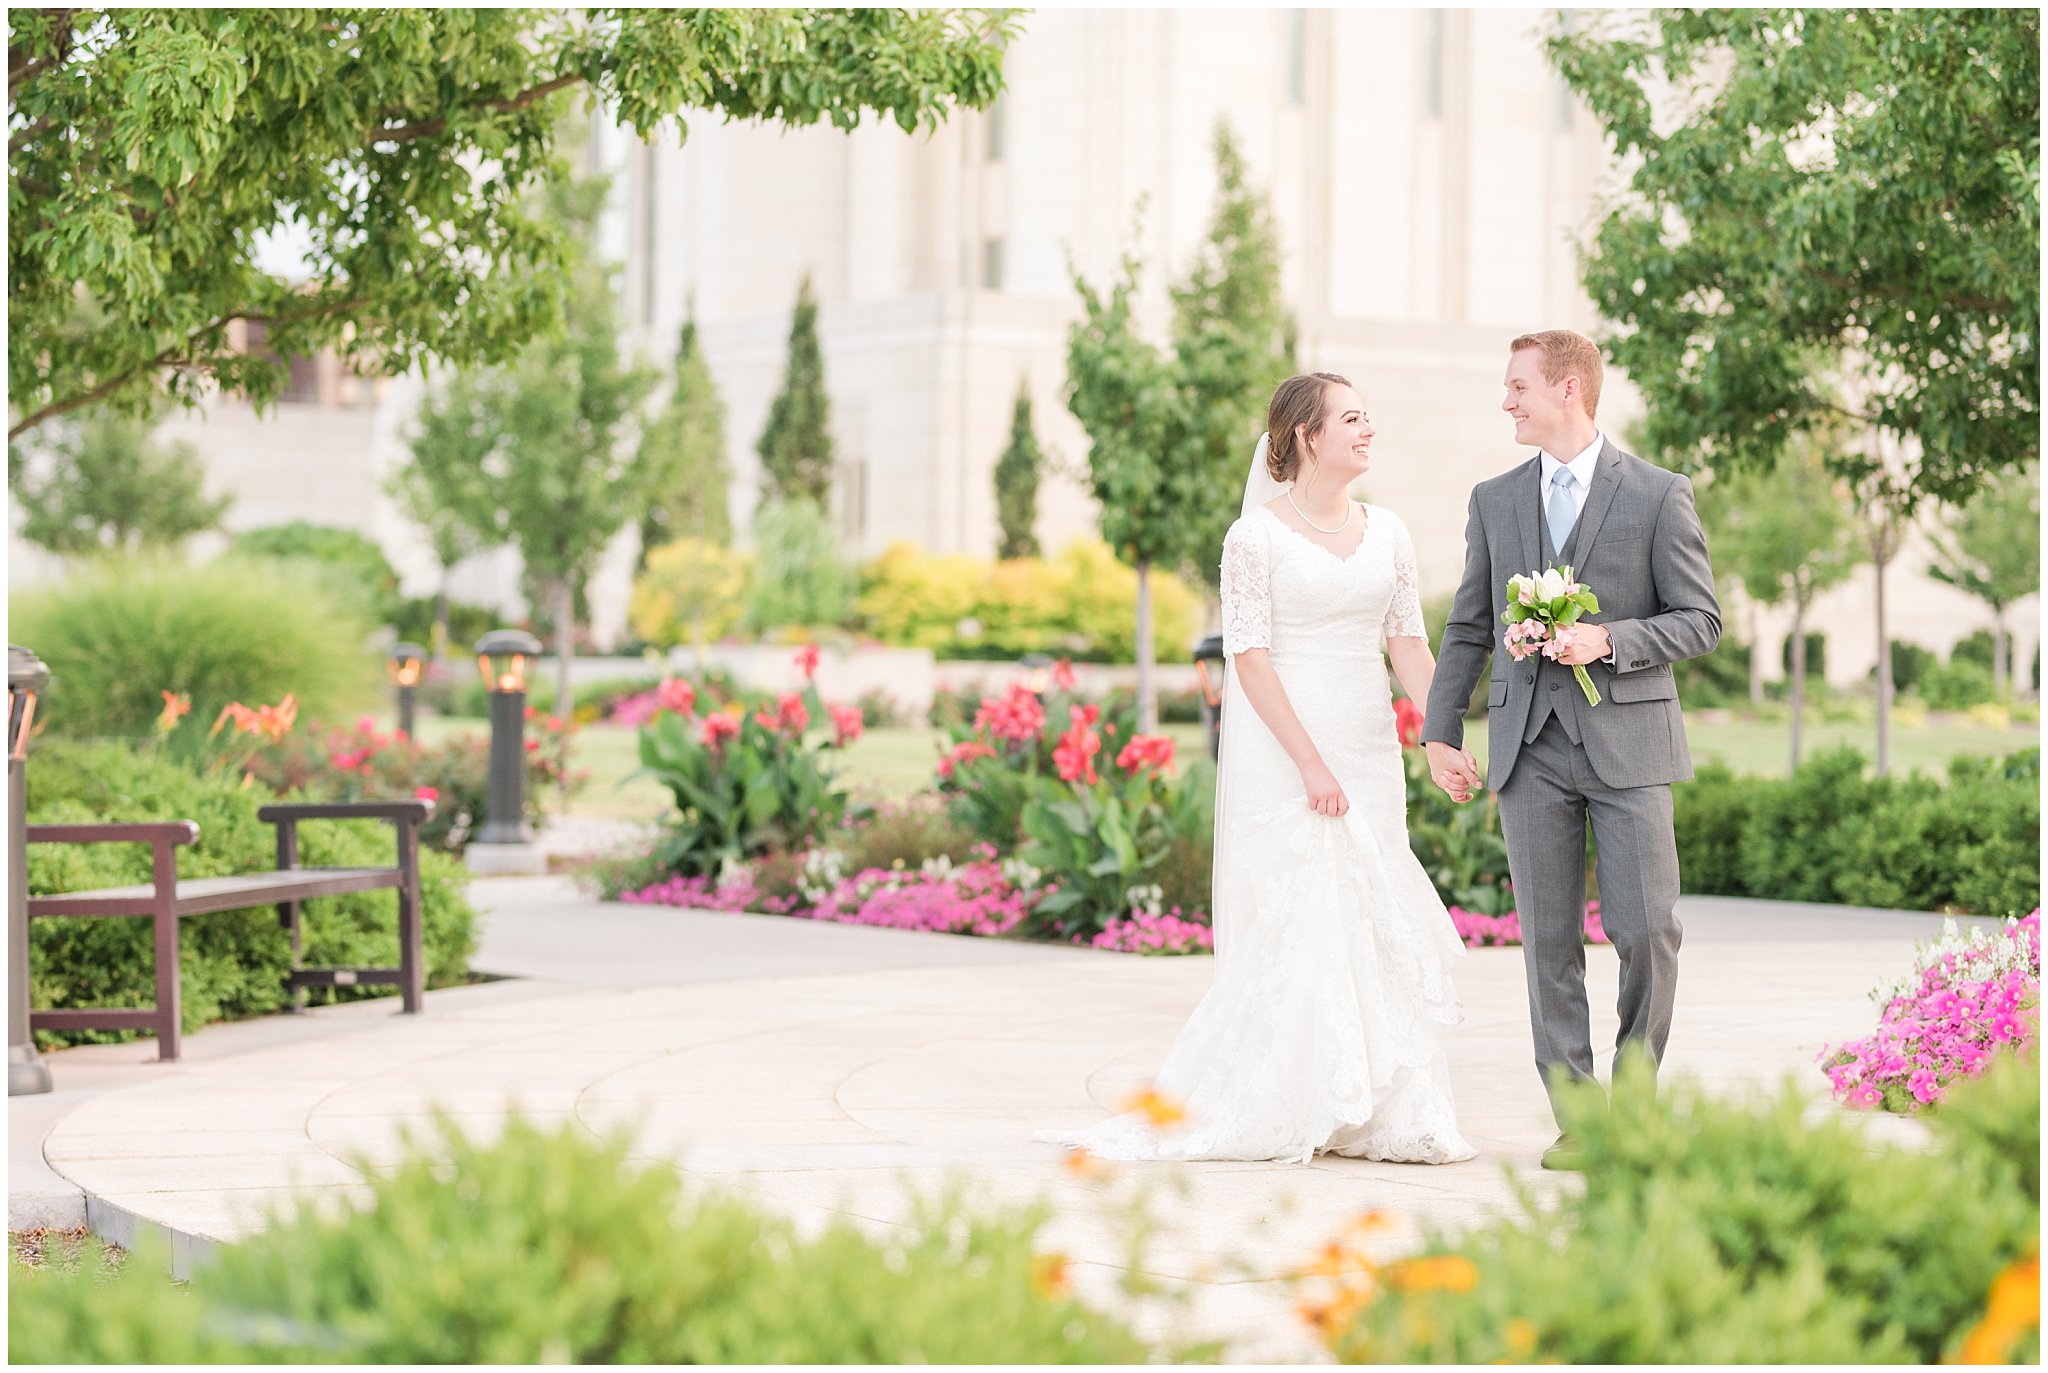 Bride and groom walk around garden at the Ogden Temple | Top Utah Wedding and Couples Photos 2019 | Jessie and Dallin Photography